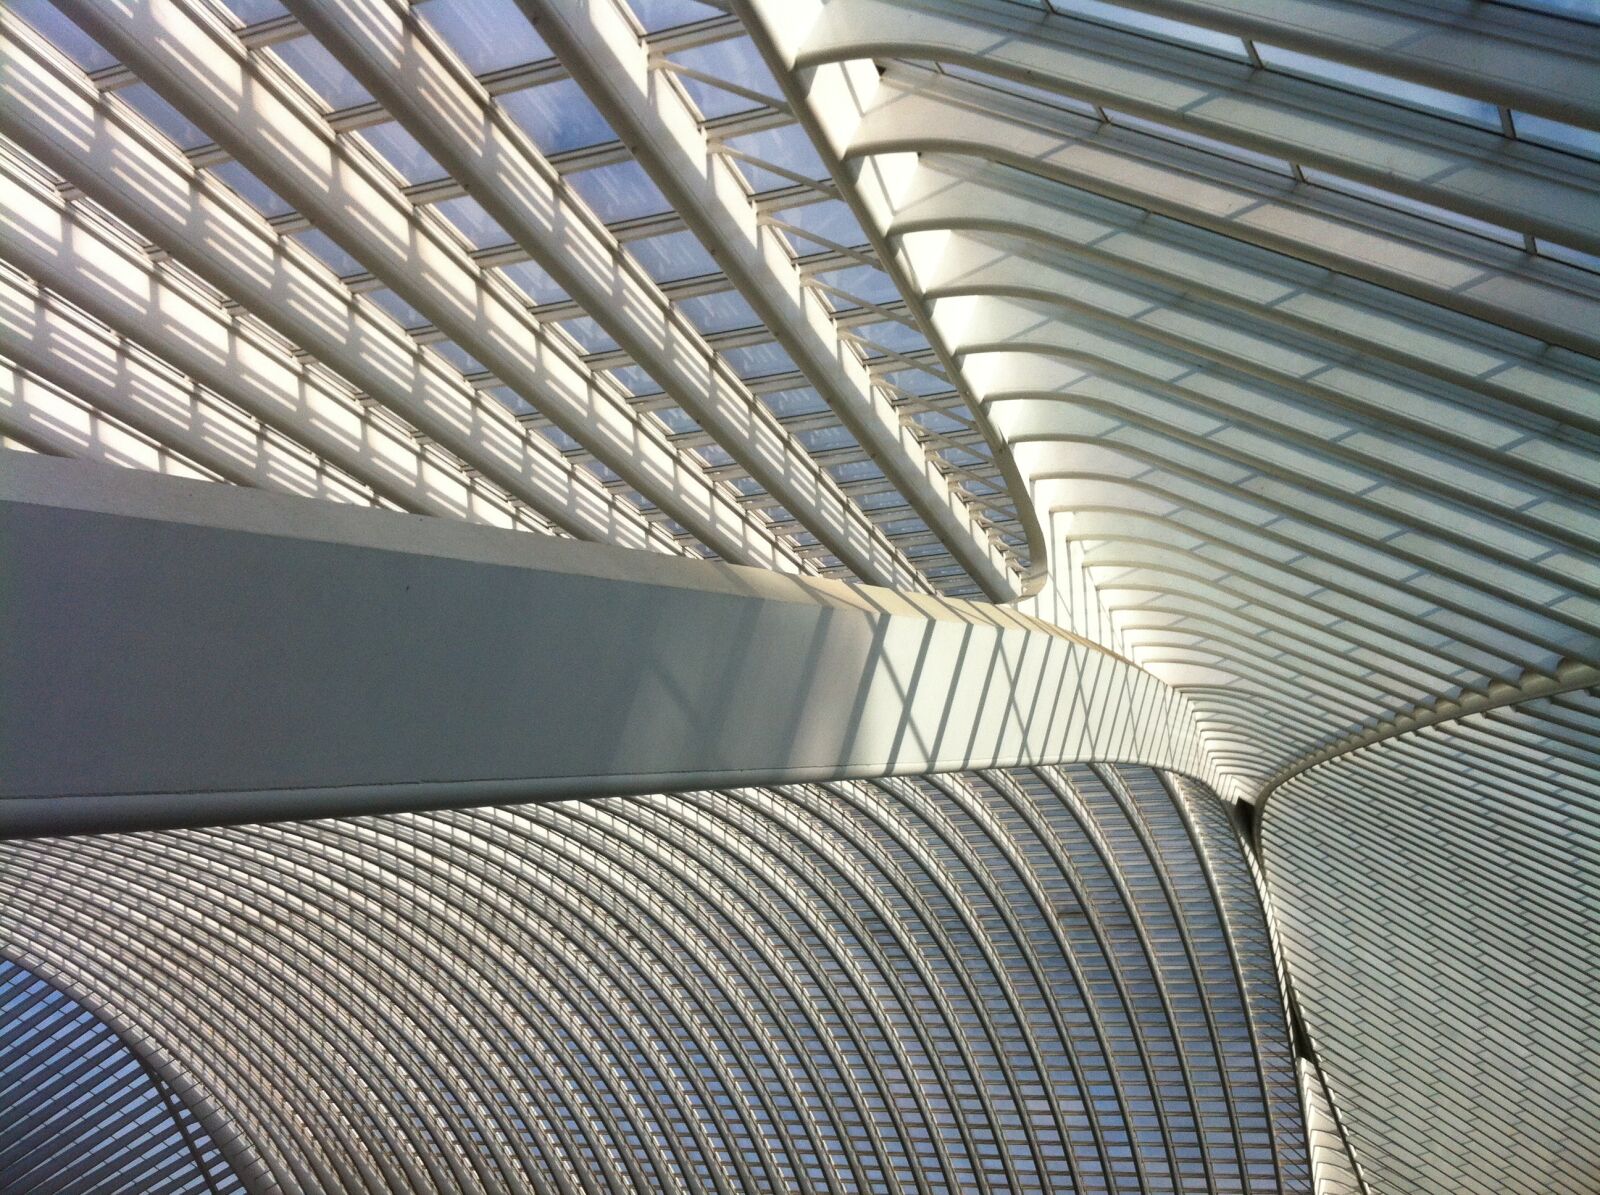 Apple iPhone 4 sample photo. Architecture, steel, glass photography